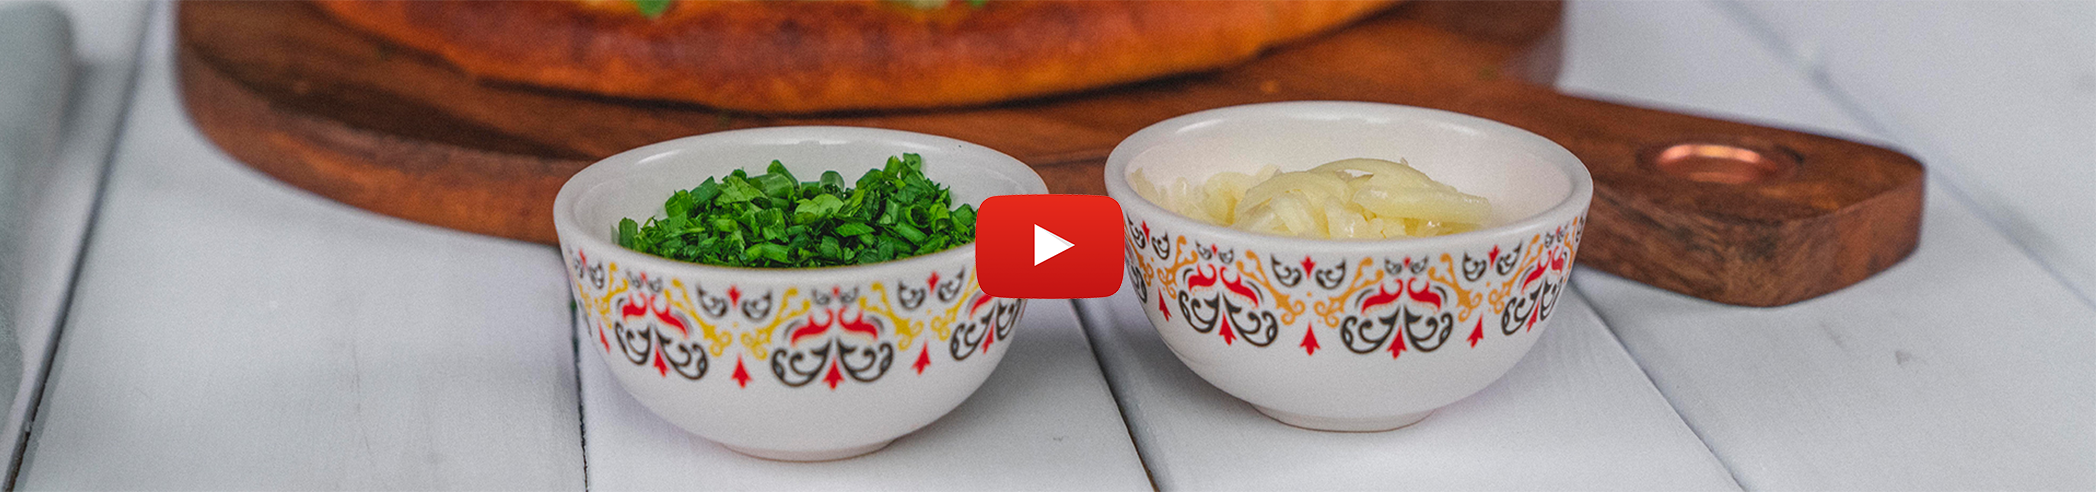 How to Prep a Tuscan Meal with Small Prep Bowls